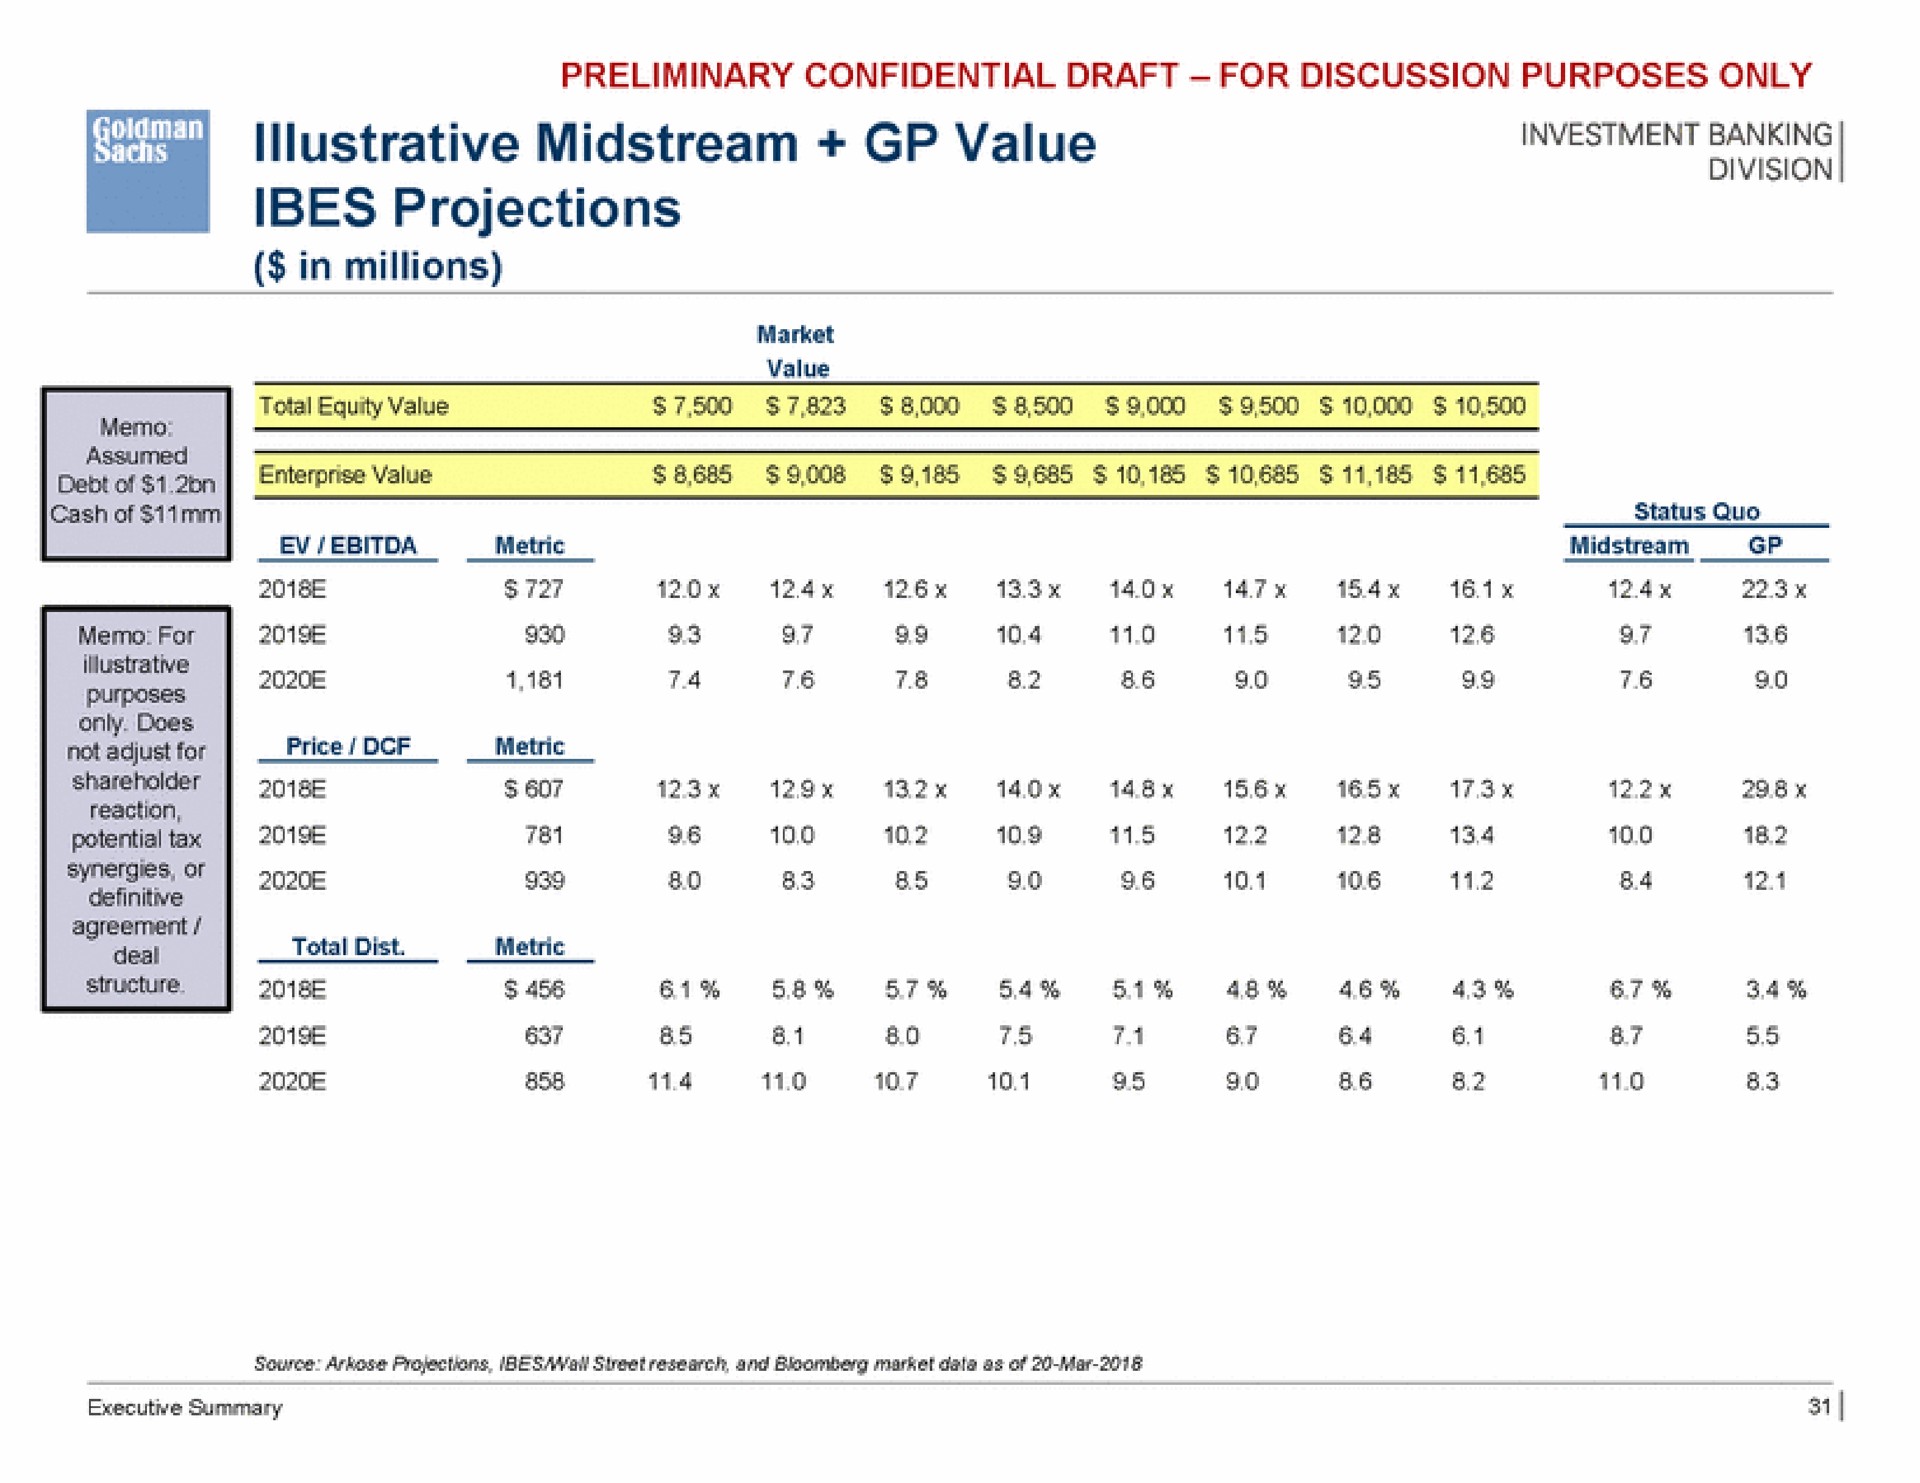 preliminary confidential draft for discussion purposes only investment banking division illustrative midstream value projections | Goldman Sachs